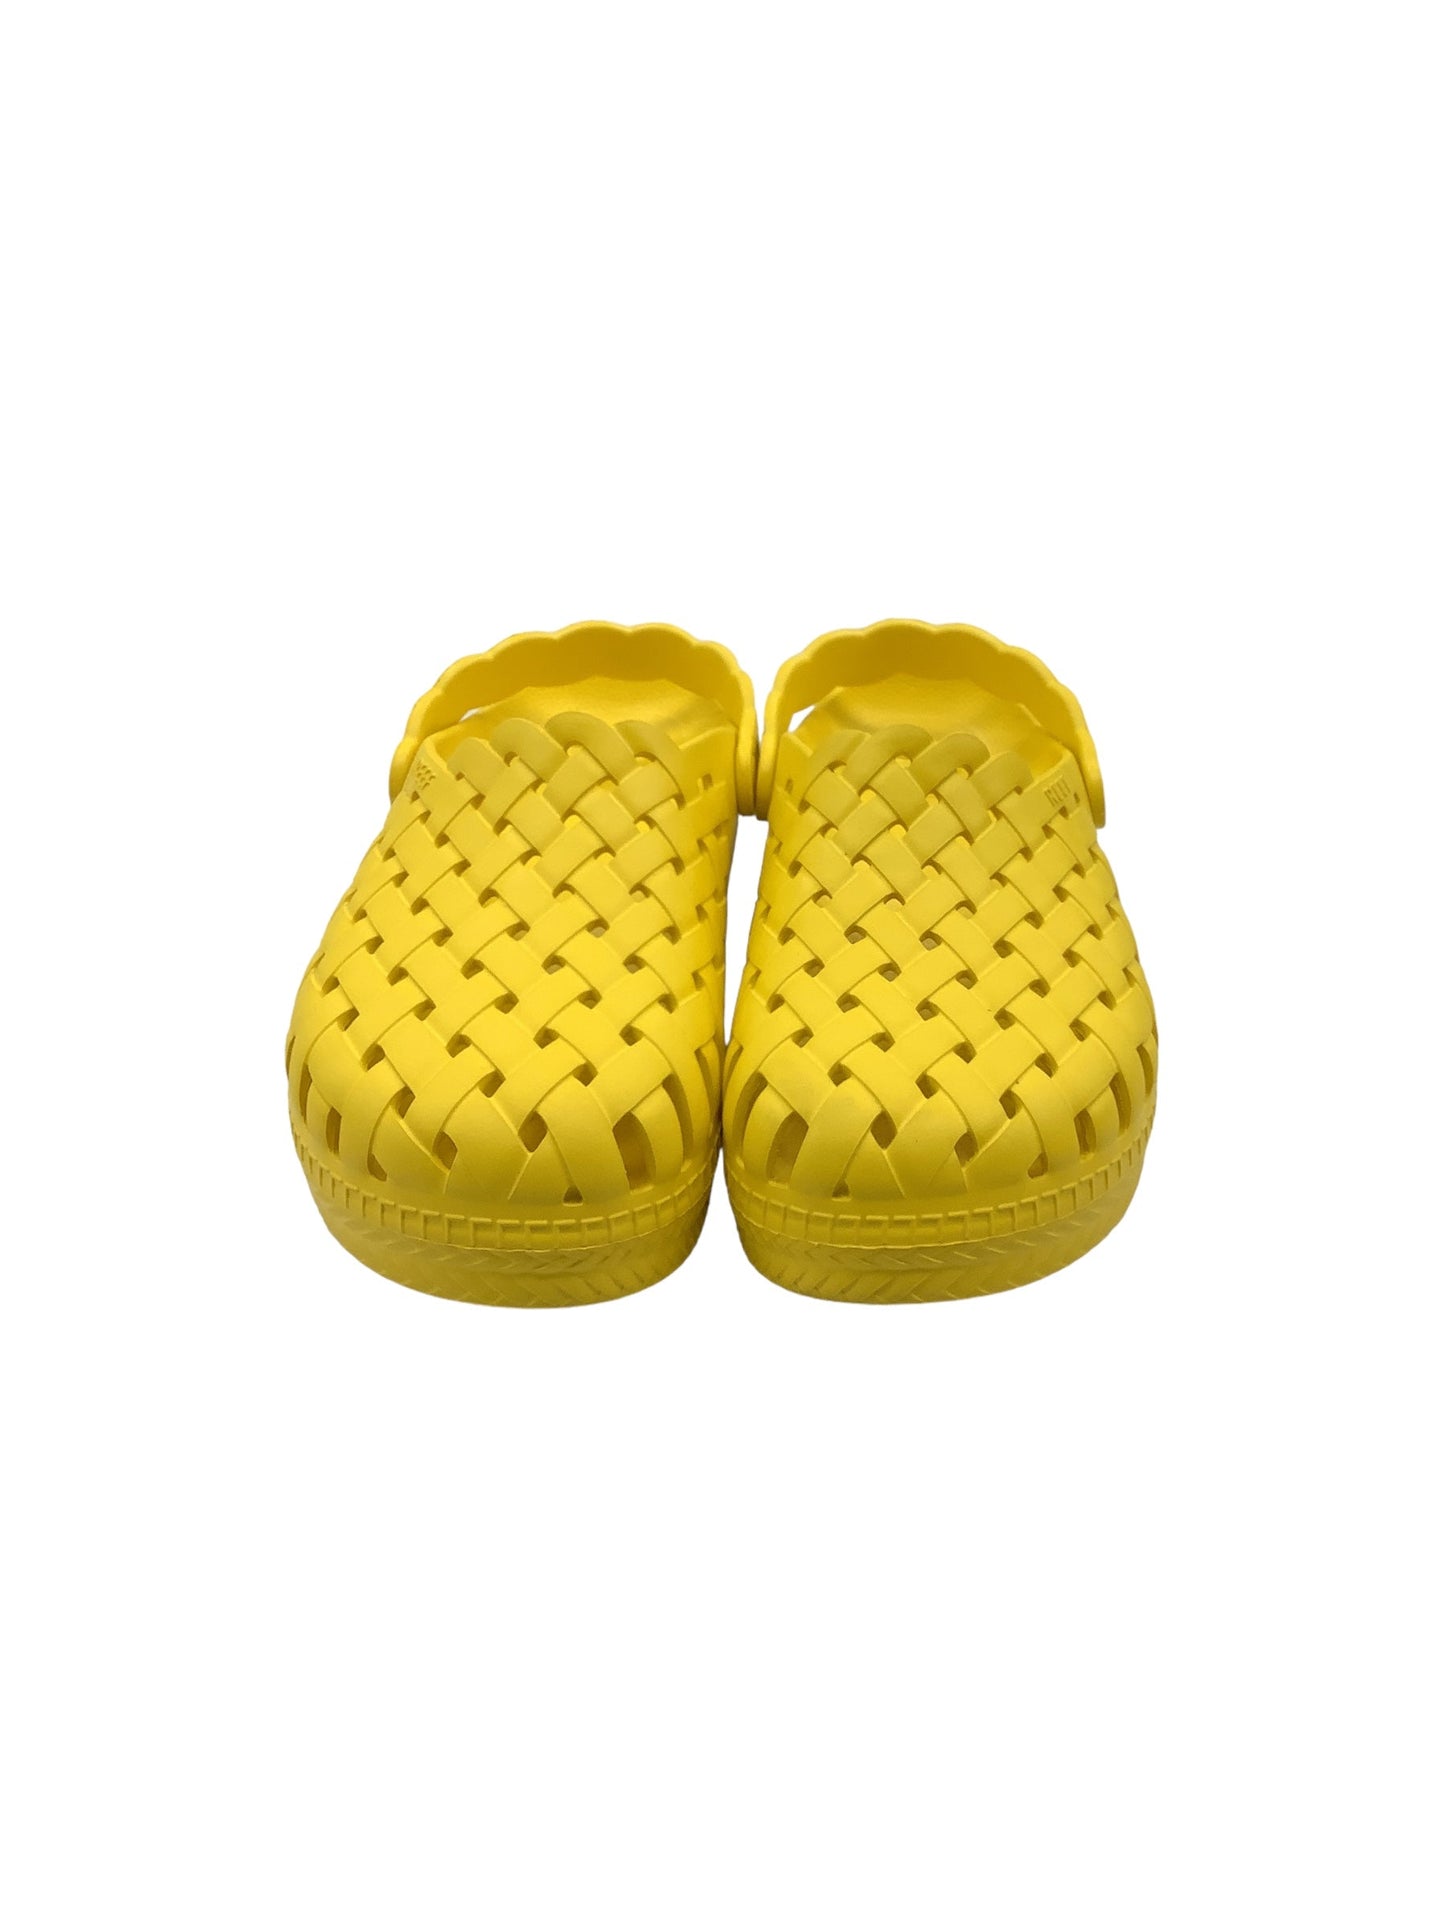 Yellow Shoes Flats Reef, Size 8